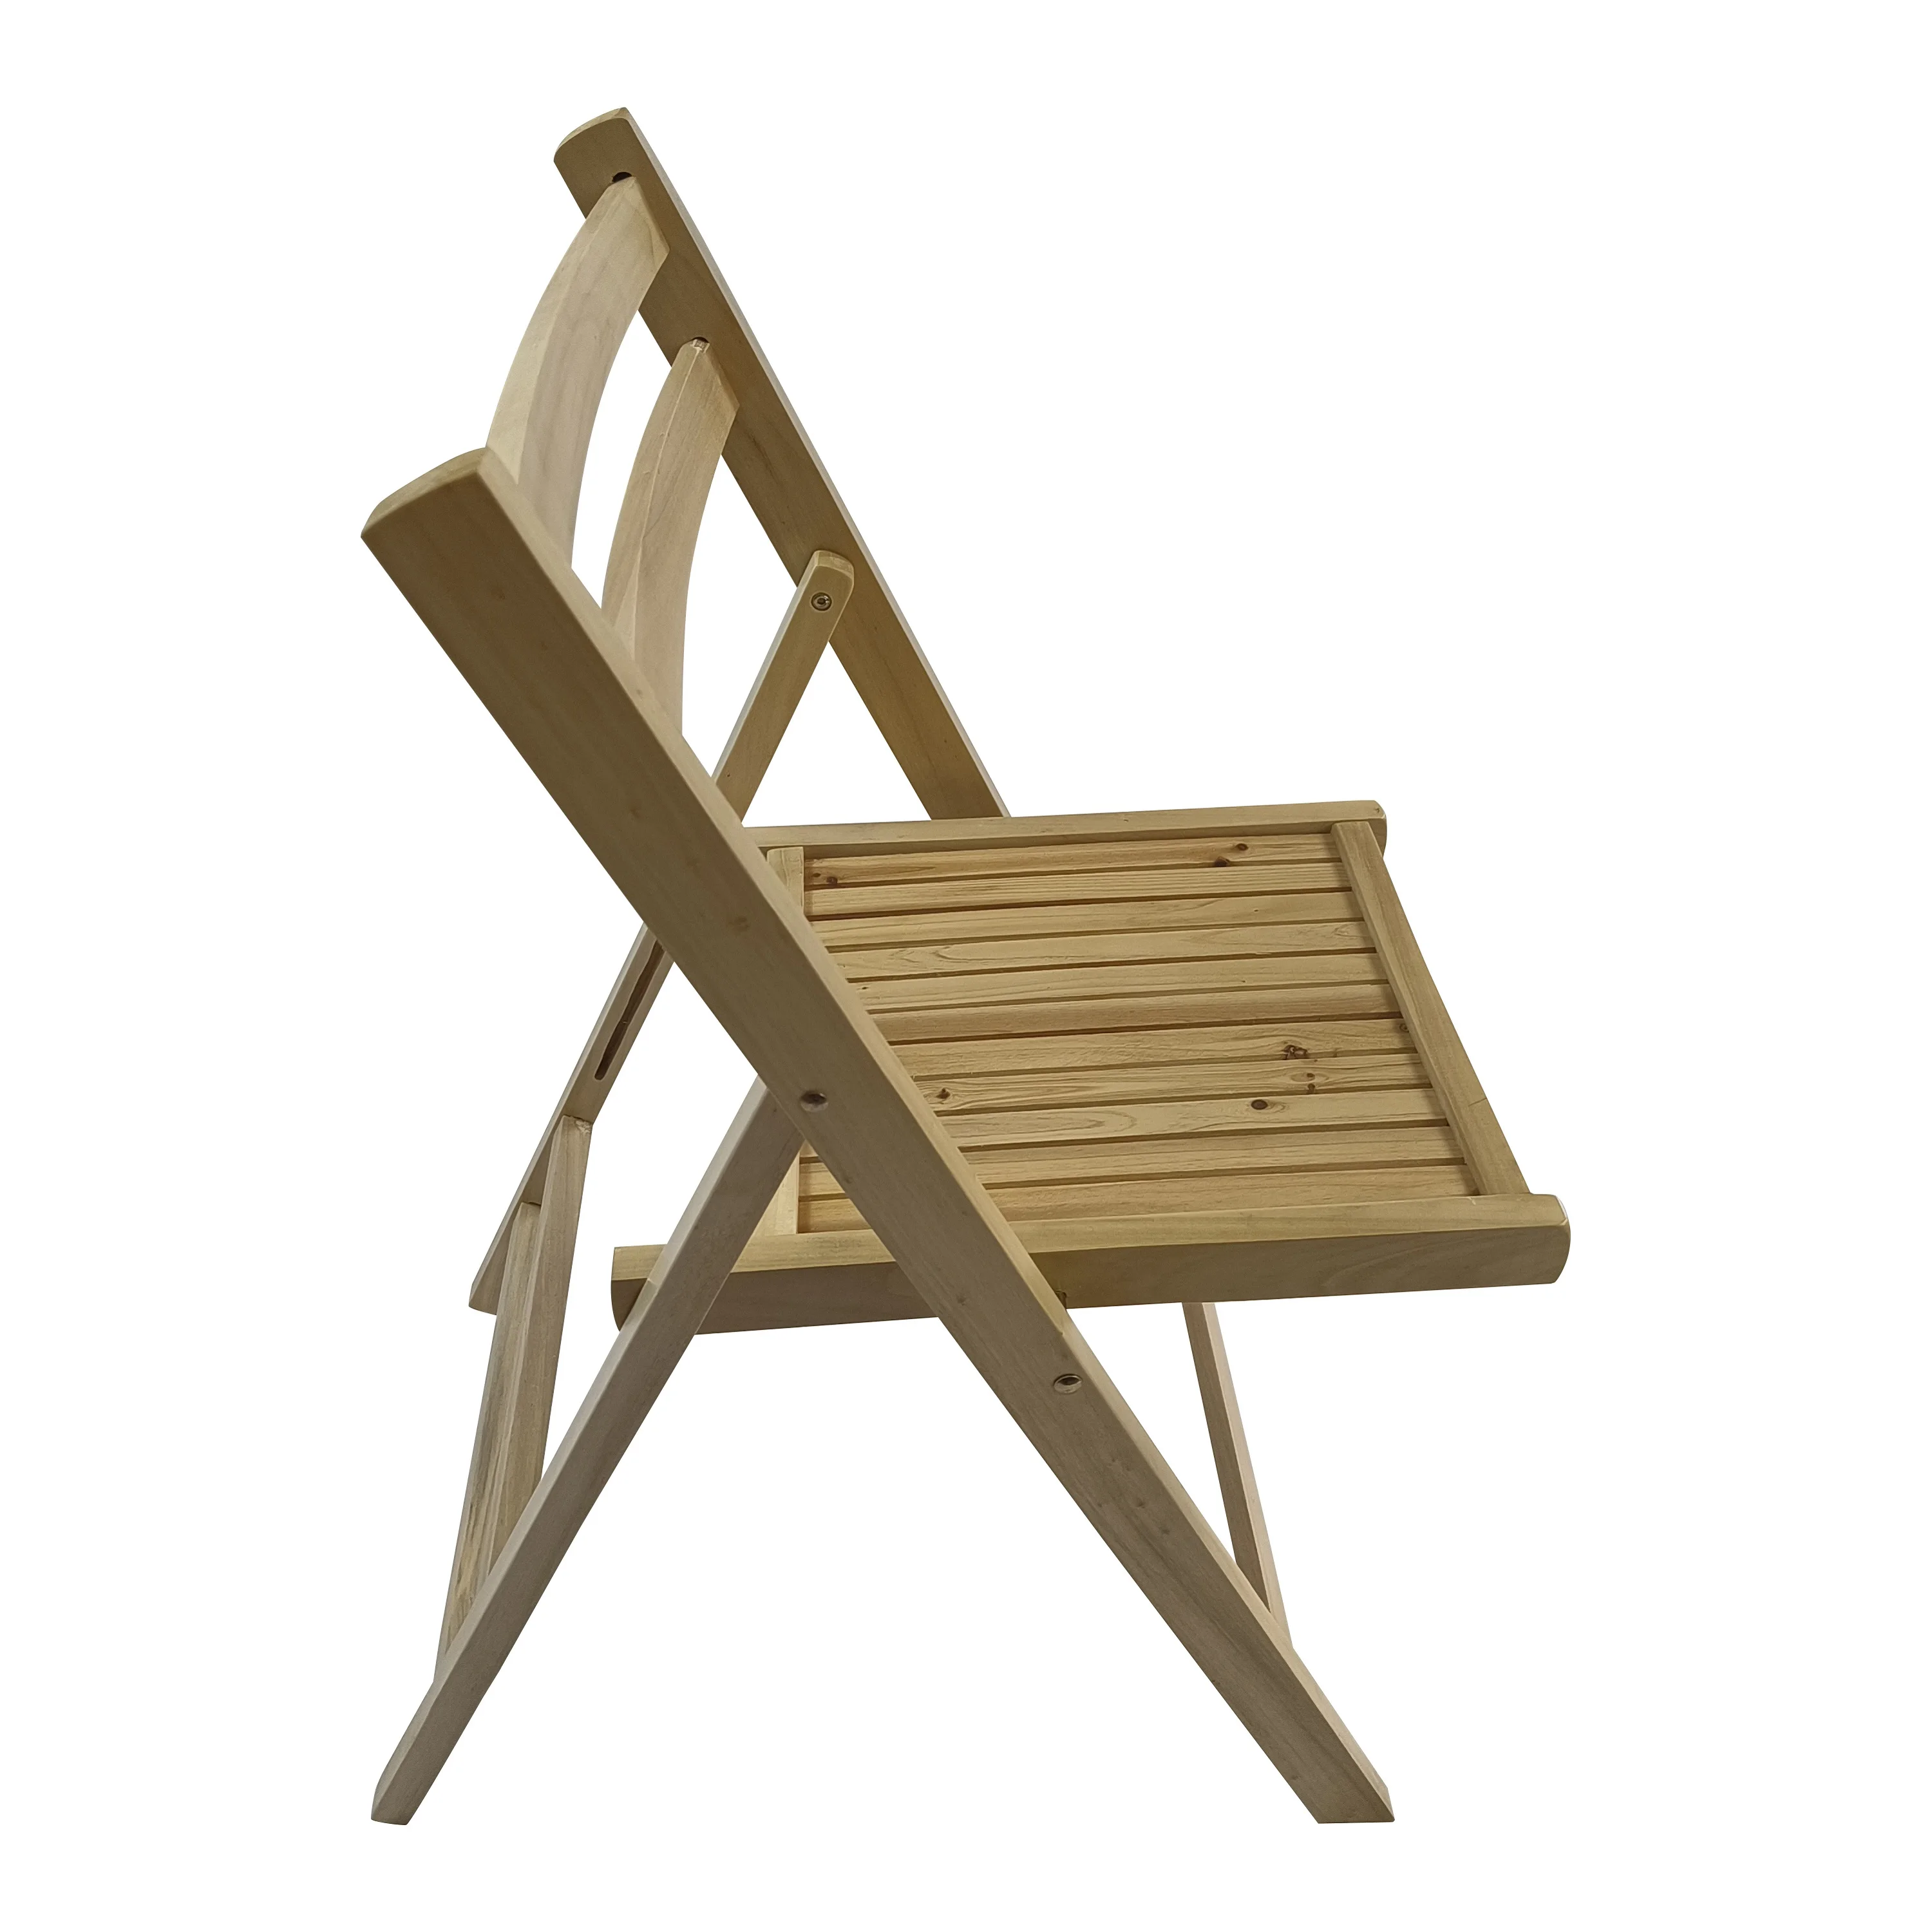 

Slatted Natural Wood Outdoor Chair 4 Piece Folding Chair Save Space Can Be Used Garden Chair Beach Chair or Meeting Room Chair